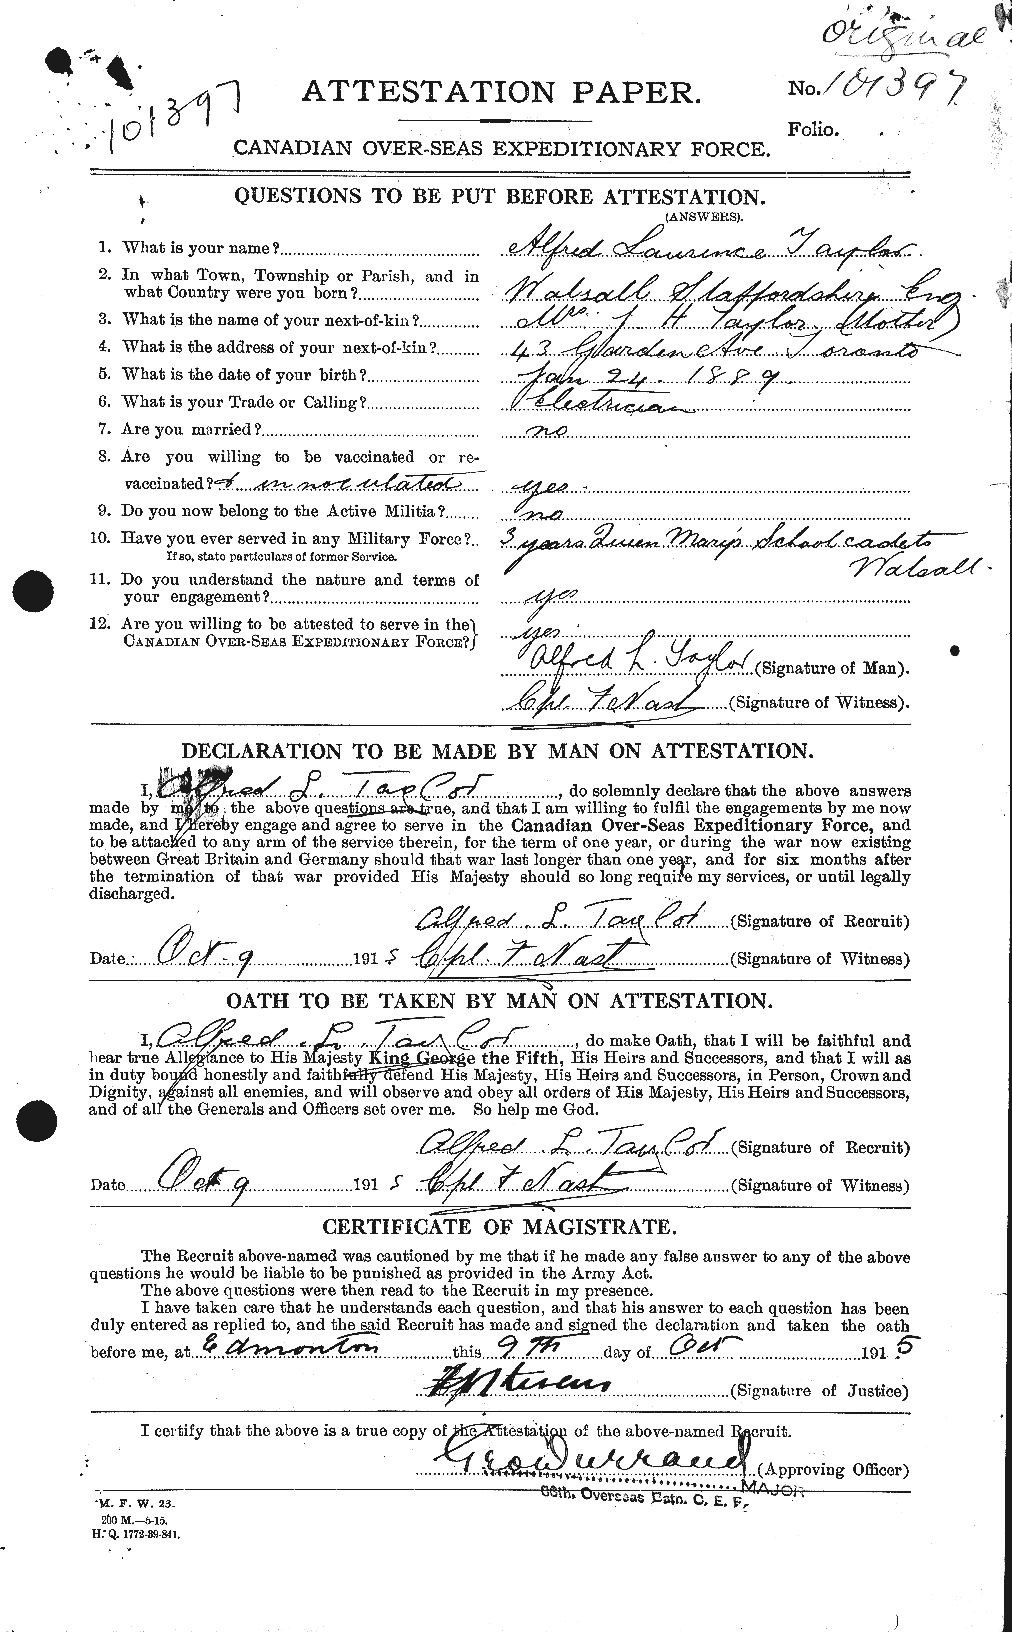 Personnel Records of the First World War - CEF 626191a